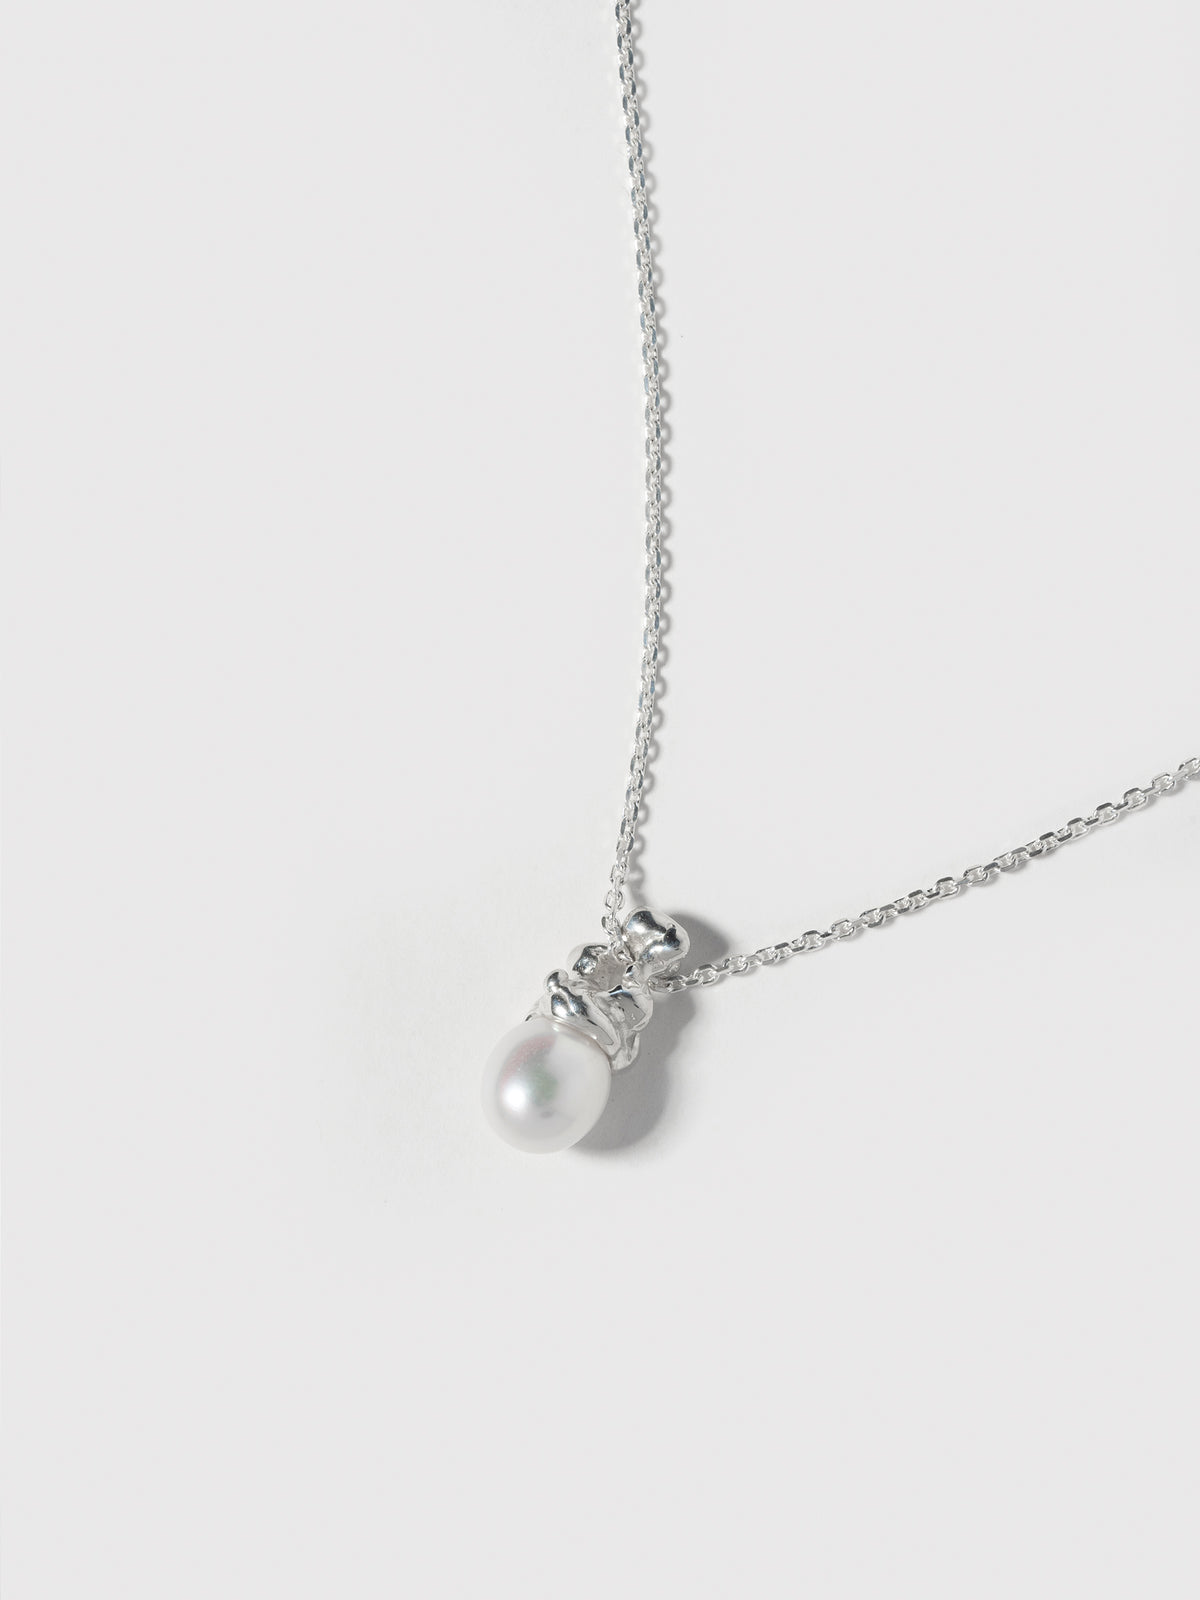 Close up image of FARIS SOPHIA Necklace pendant in sterling silver